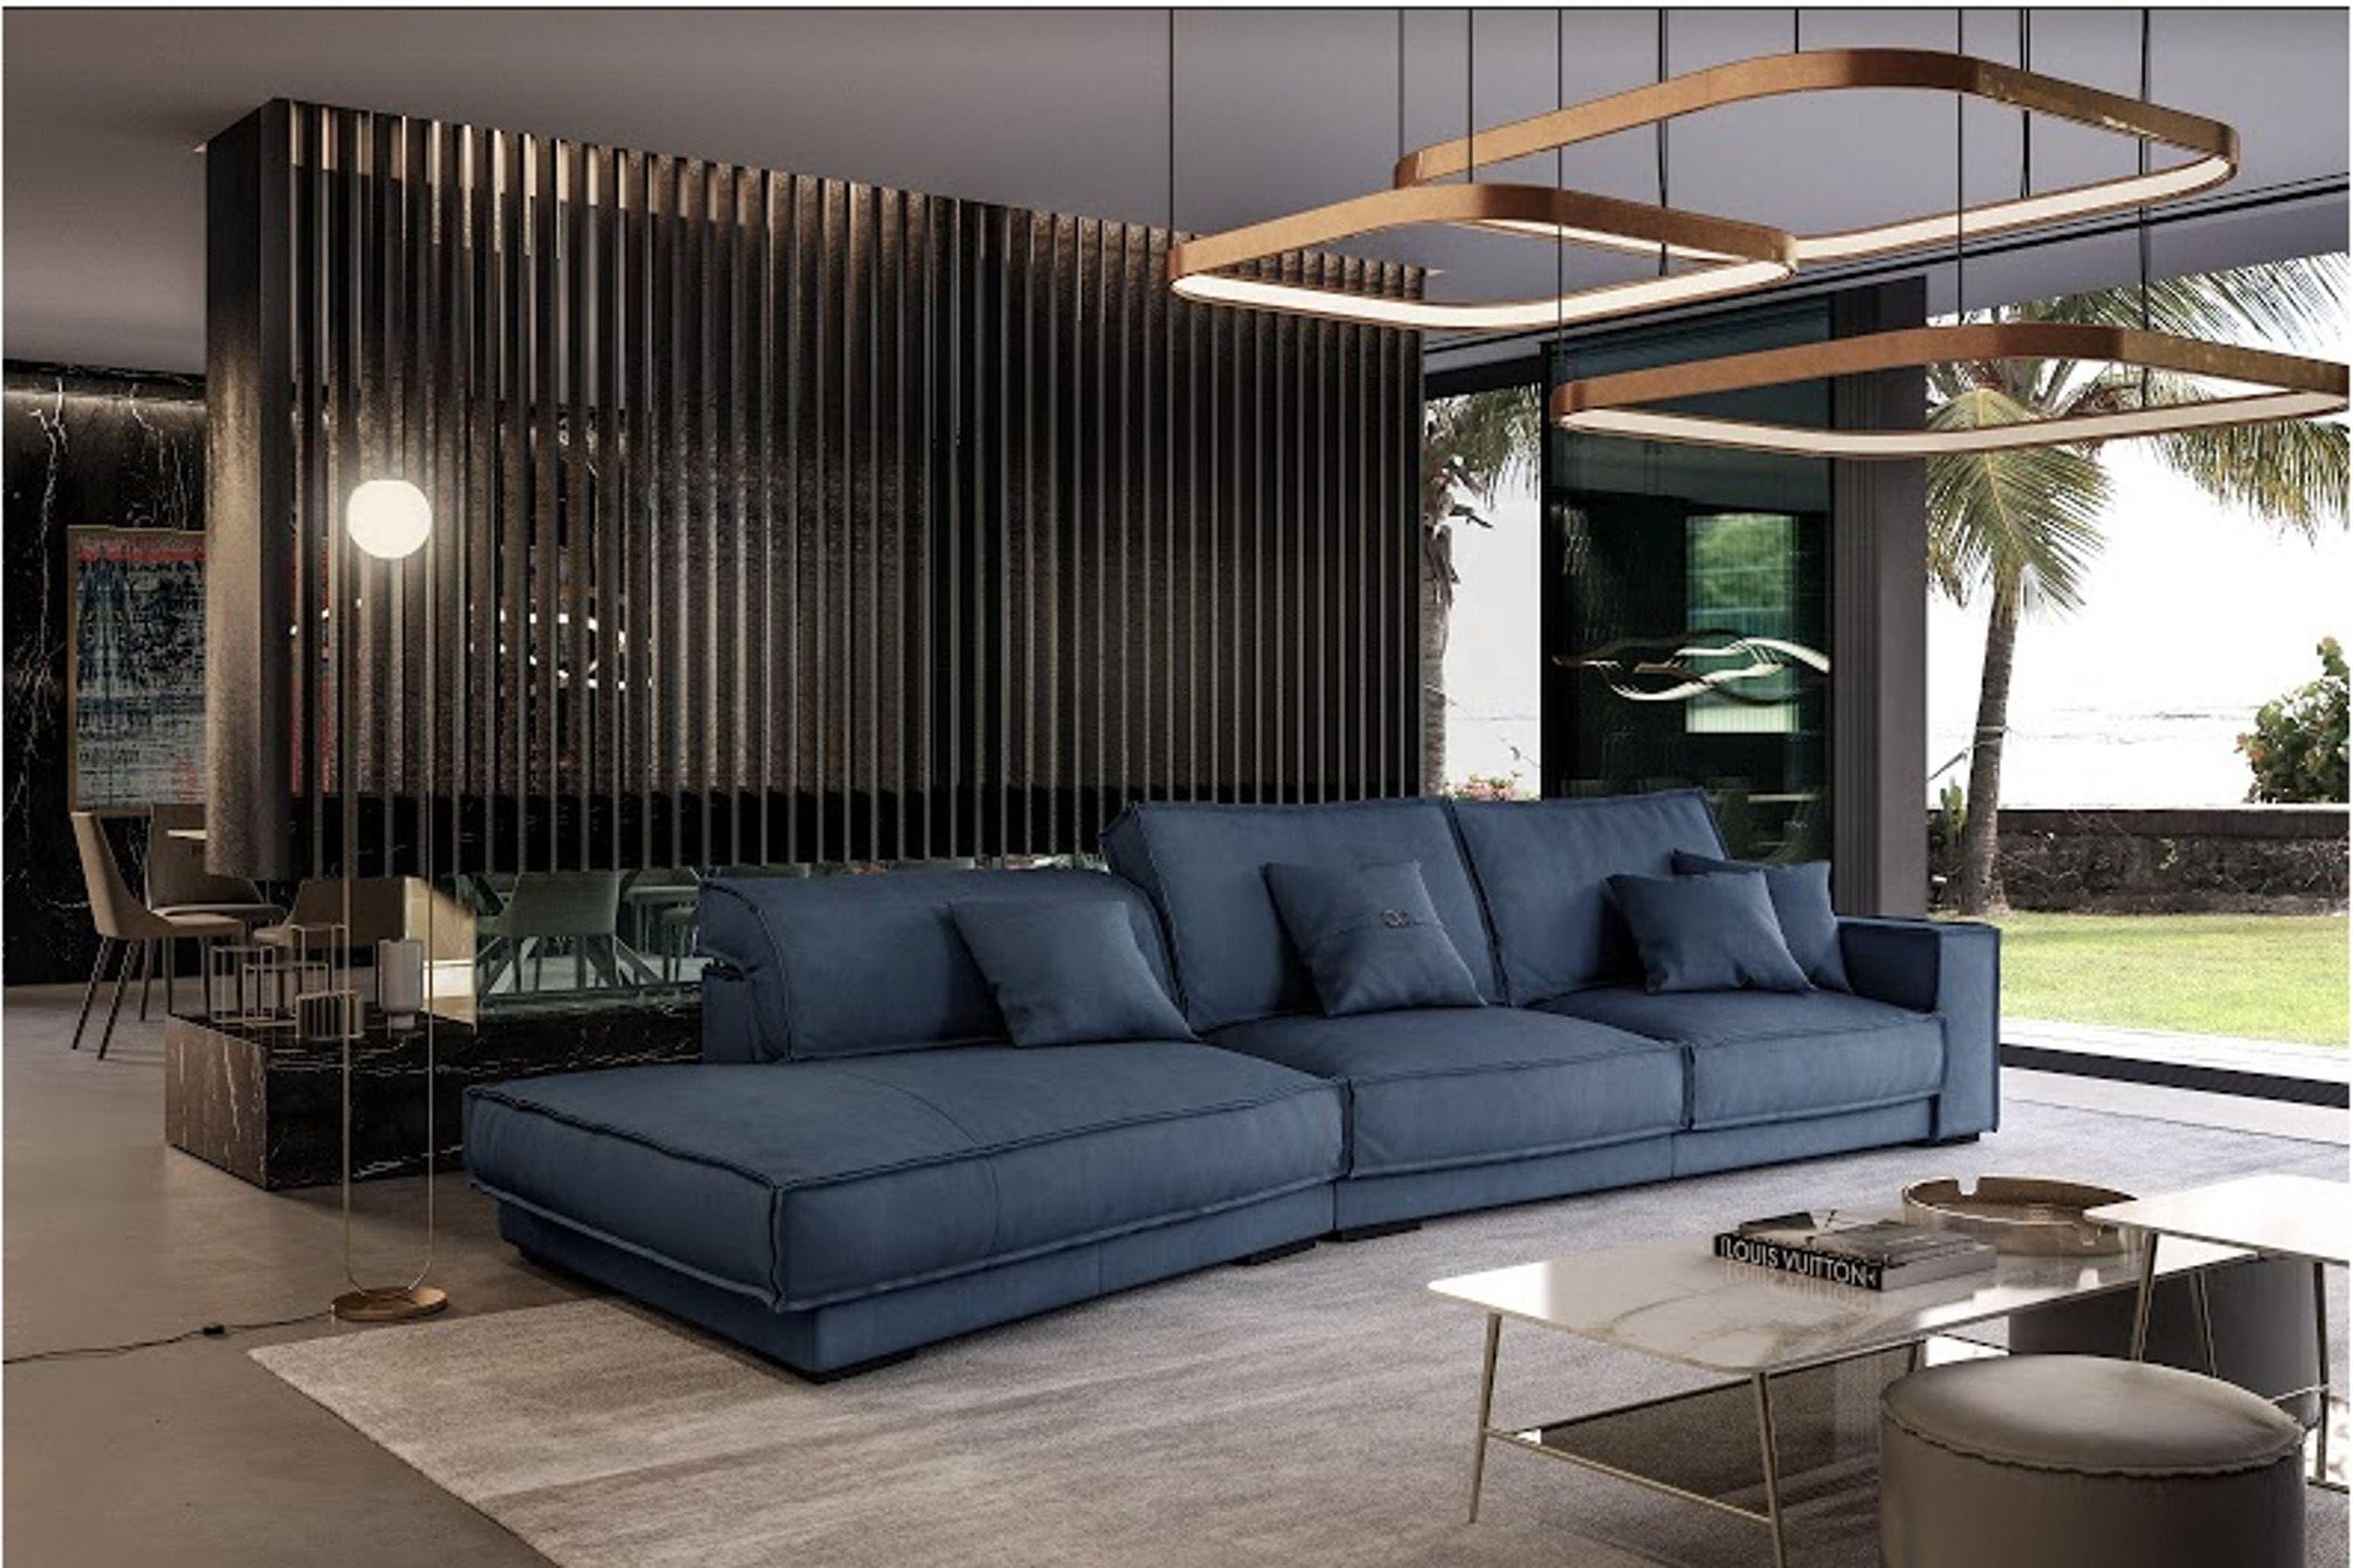 Contemporary, Modern Sectional Sofa VGCCBAXTER-STATUS-BLUE VGCCBAXTER-STATUS-BLUE in Blue Italian Leather